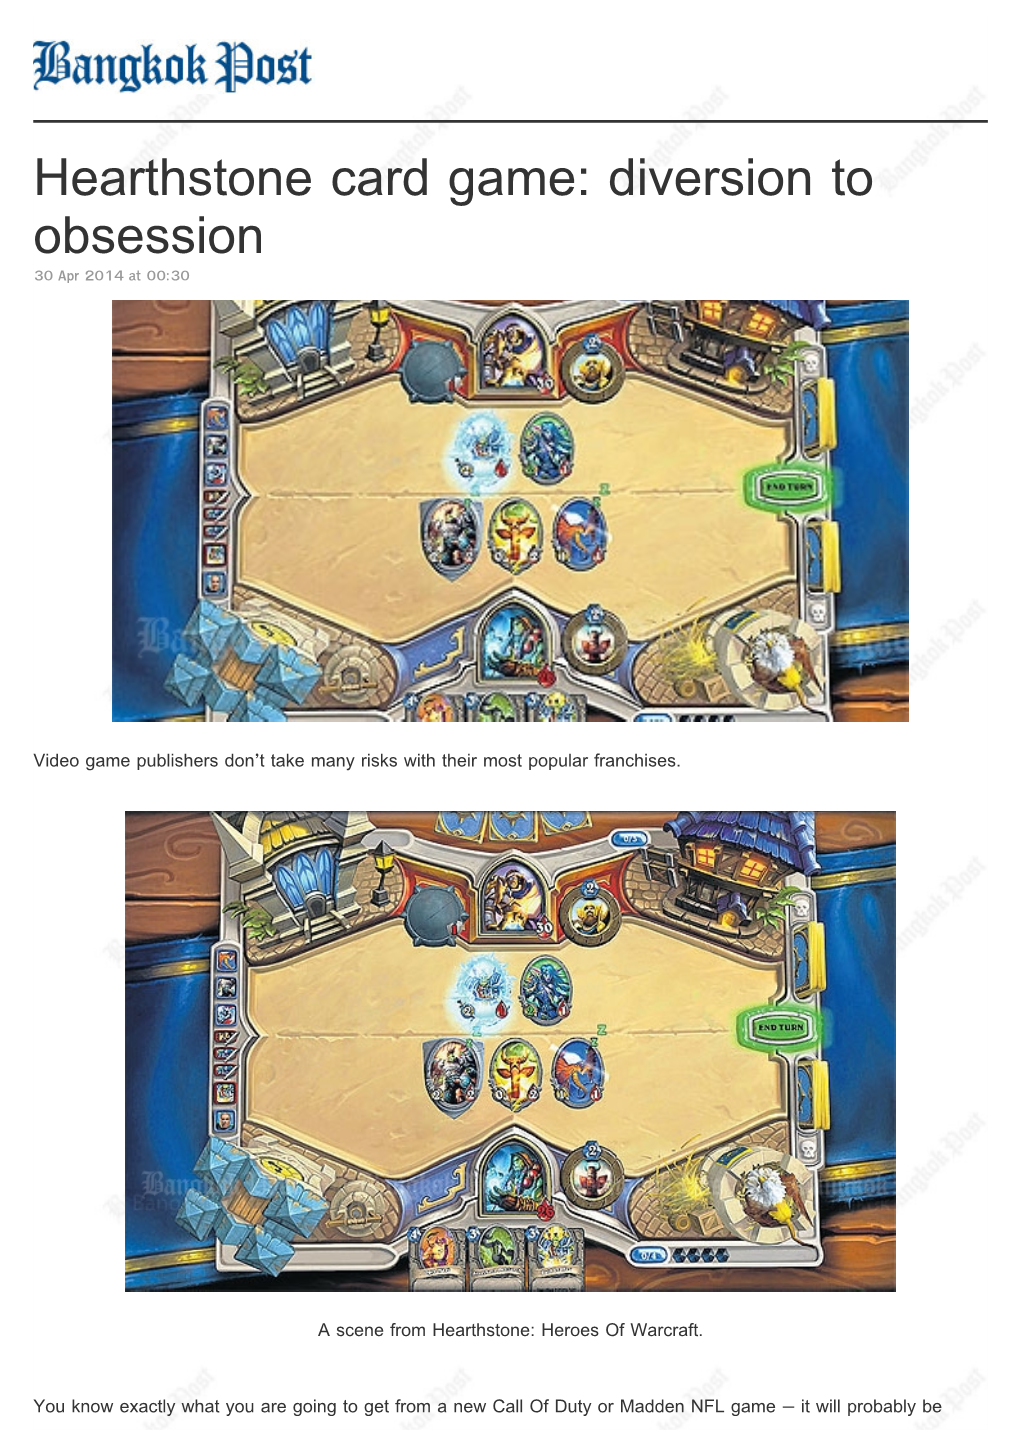 Hearthstone Card Game: Diversion to Obsession 30 Apr 2014 at 00:30